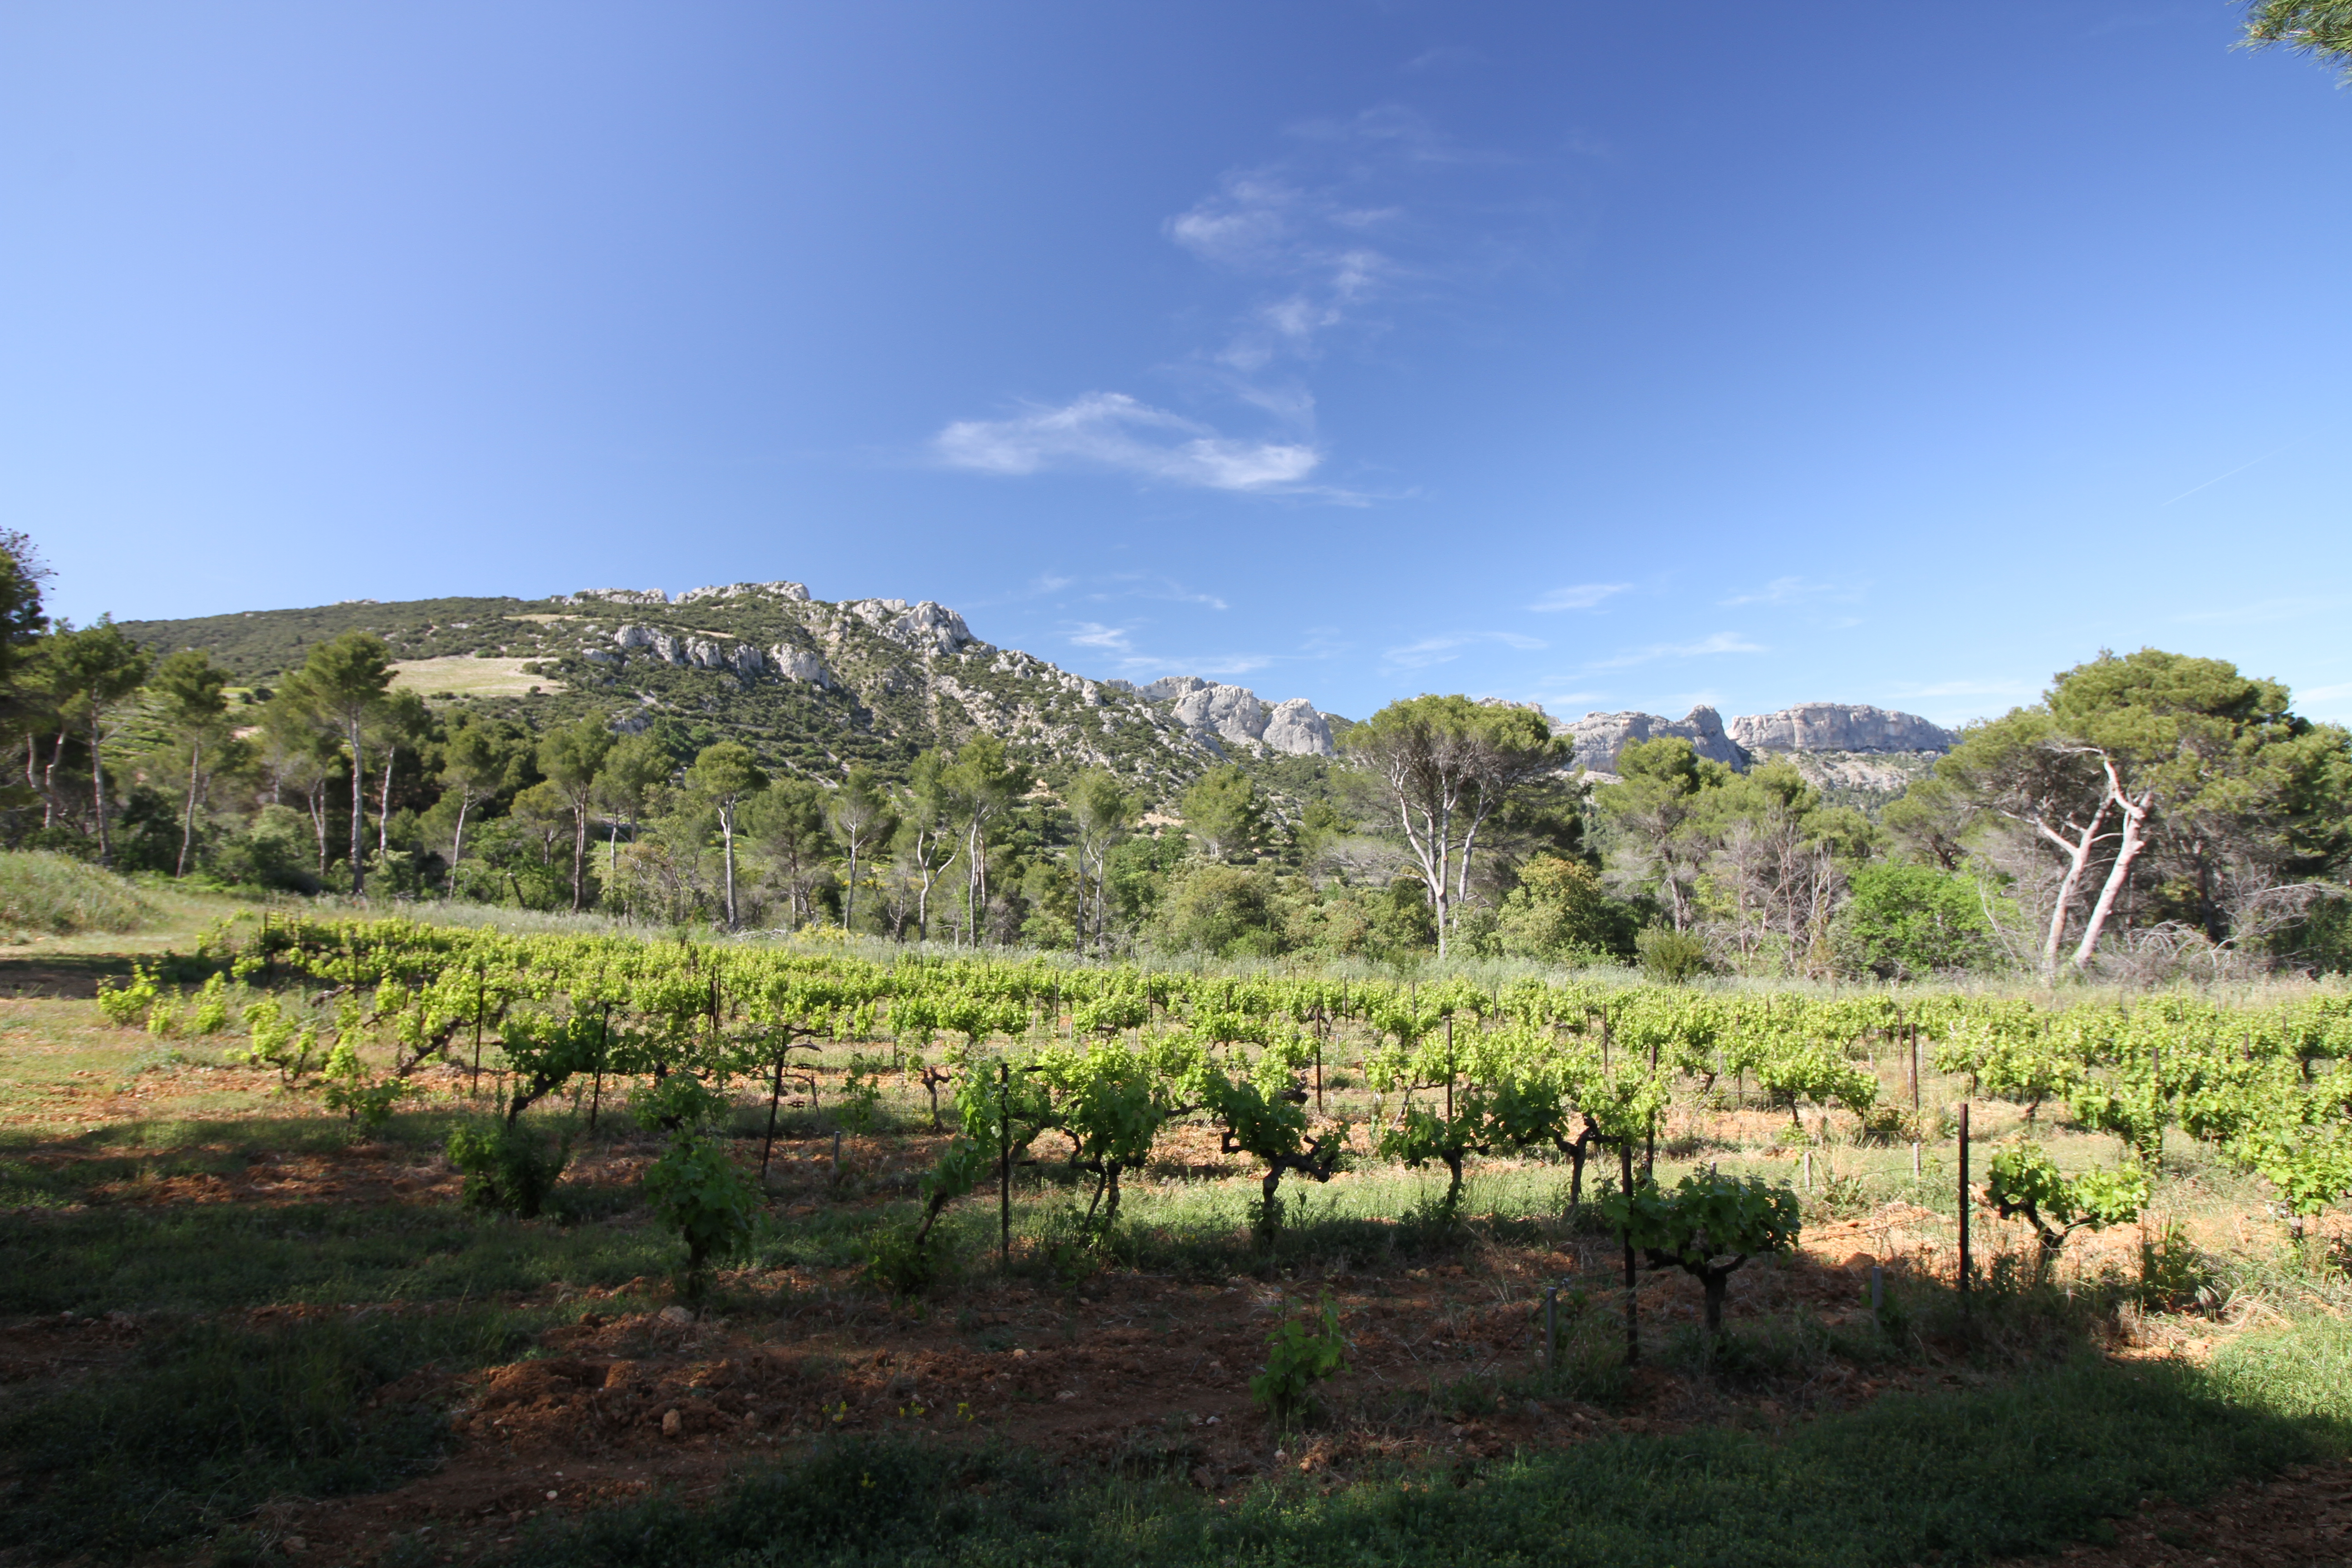 The view from Domaine de Coyeux